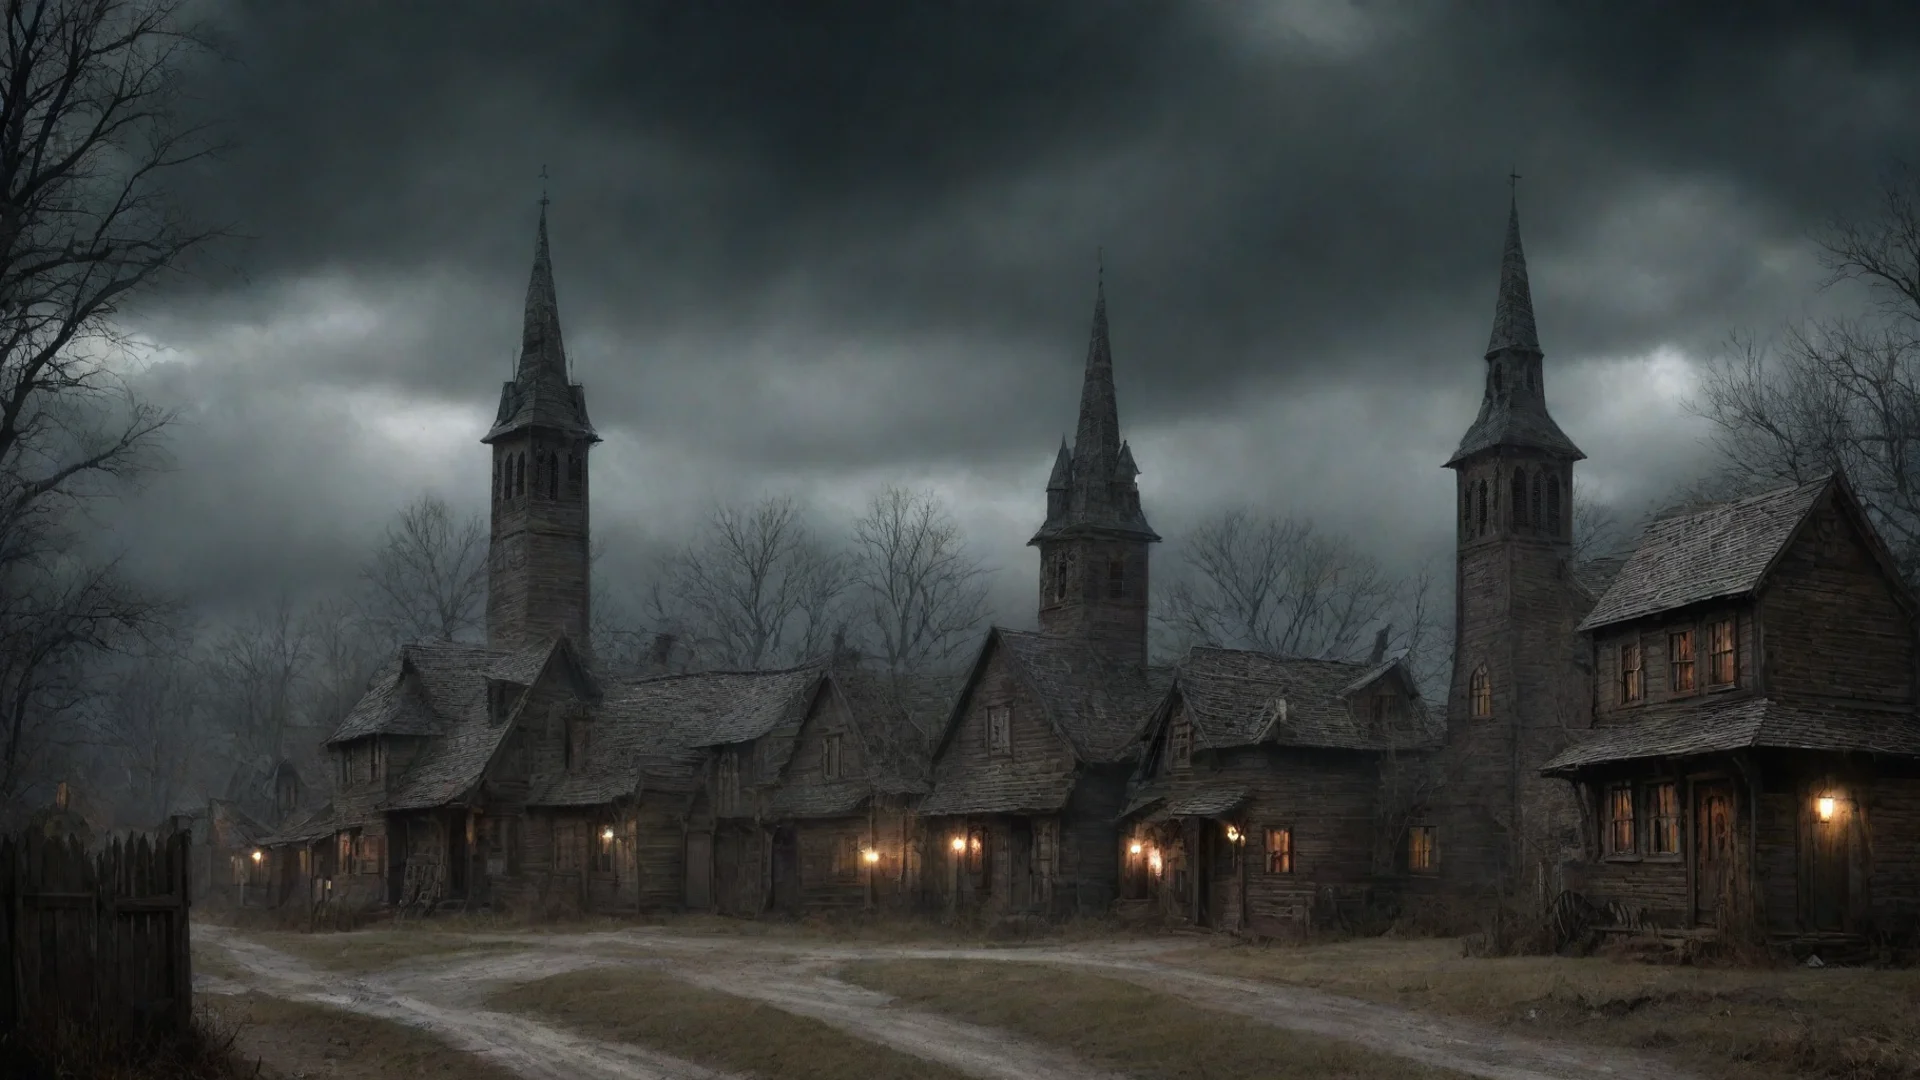 amazing old spooky town 1800s vampire town steeple olden days windswept hd epic awesome portrait 2 wide